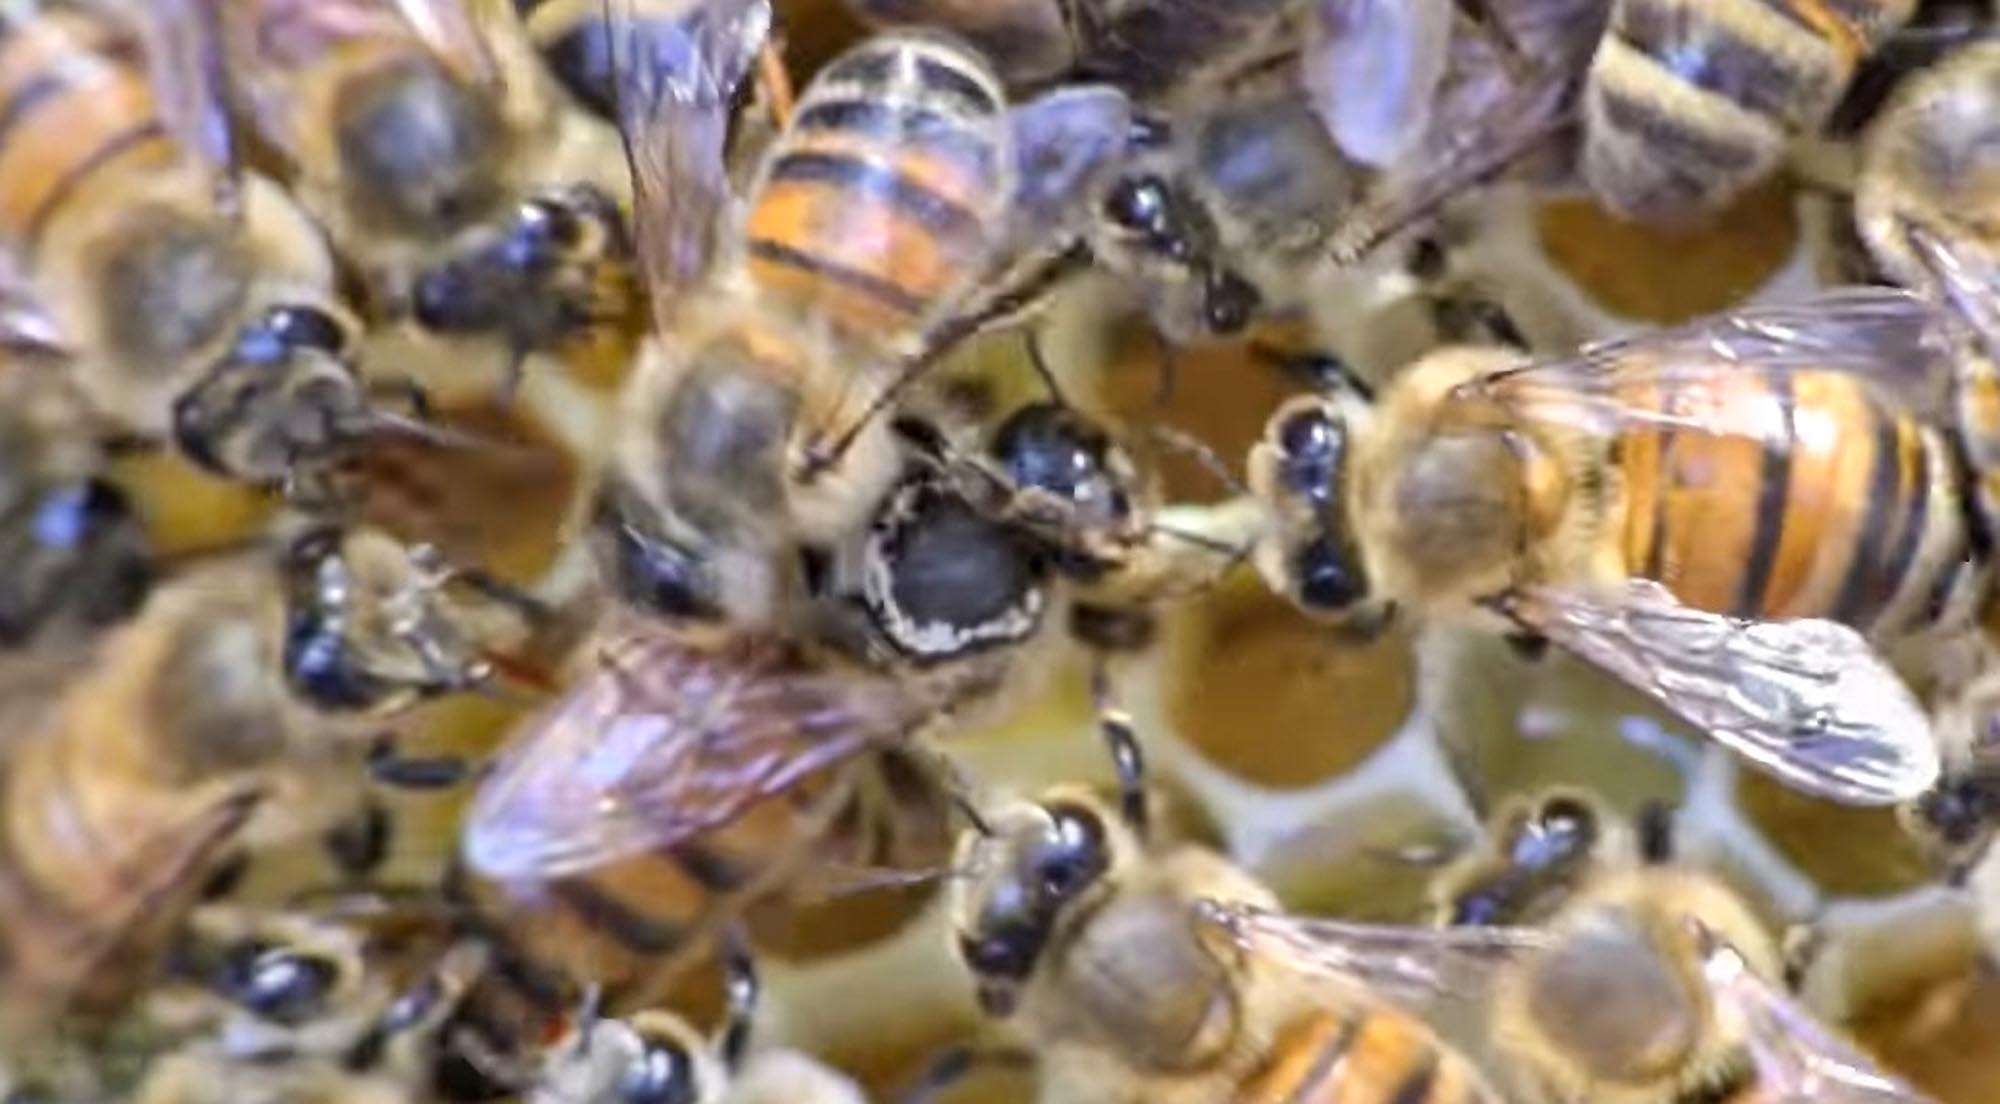 Honeybee Nests Are Highly Resilient, Study Shows